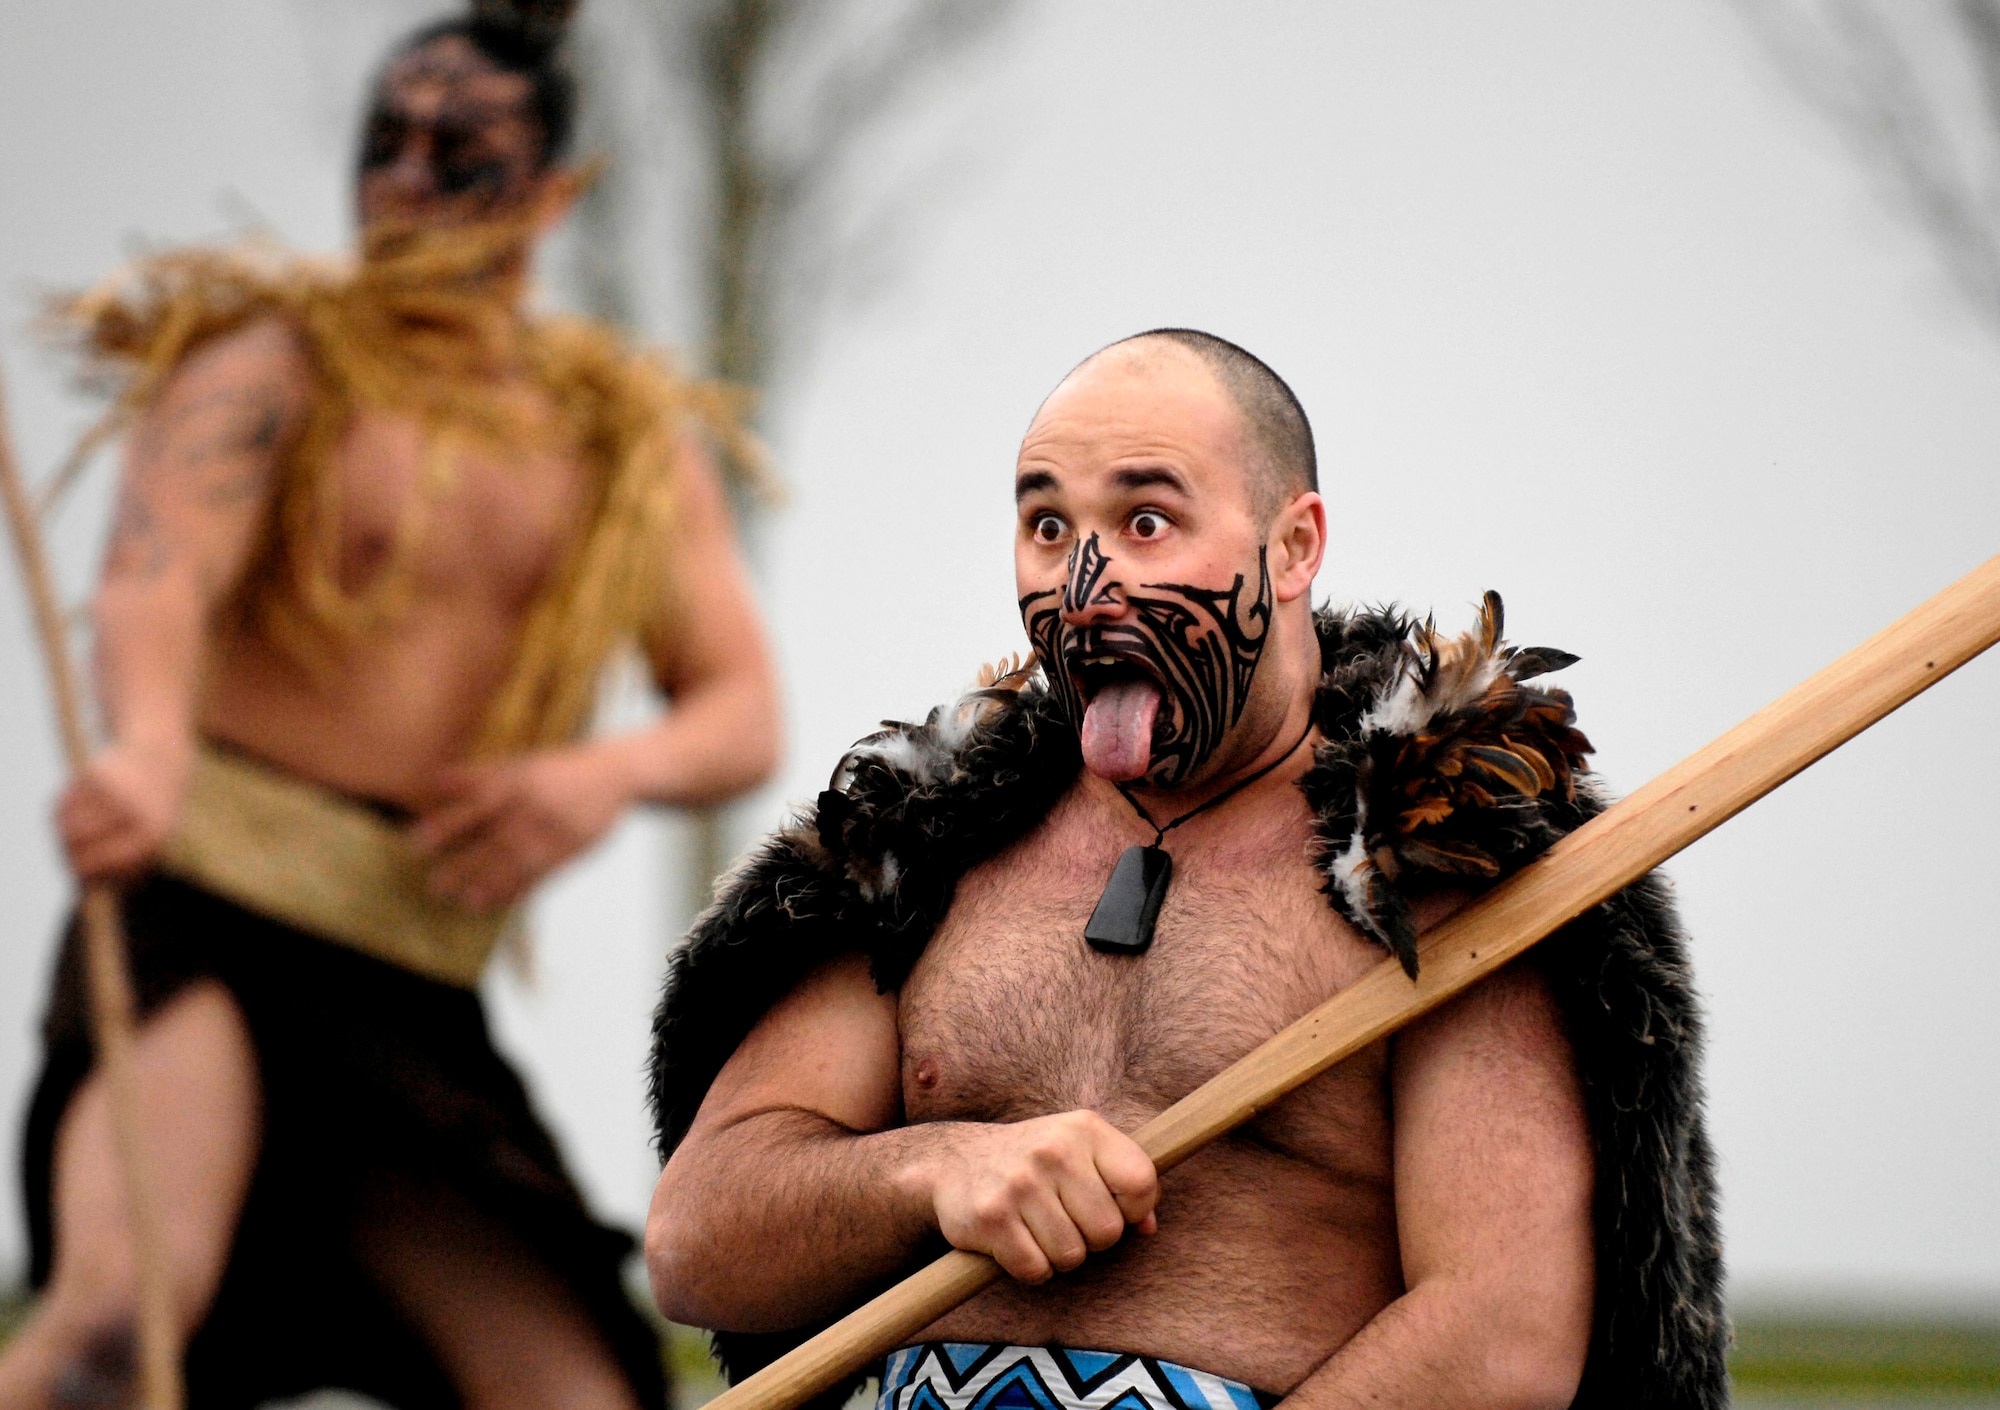 Maori warriors perform a Powhiri, or traditional welcoming ceremony, Aug. 18 for Airmen who just arrived at Christchurch, New Zealand.  The Airmen, from McChord Air Force Base, Wash., are at Christchurch to begin the annual winter fly-in, known as WinFly.  During these flights, aircrews transport scientists, support personnel, food and equipment for the U.S. Antarctic program at McMurdo Station, Antarctica. WinFly is the opening of the first flights to McMurdo station, which closed for the austral winter in February. (U.S. Air Force photo/Tech. Sgt. Shane A. Cuomo) 